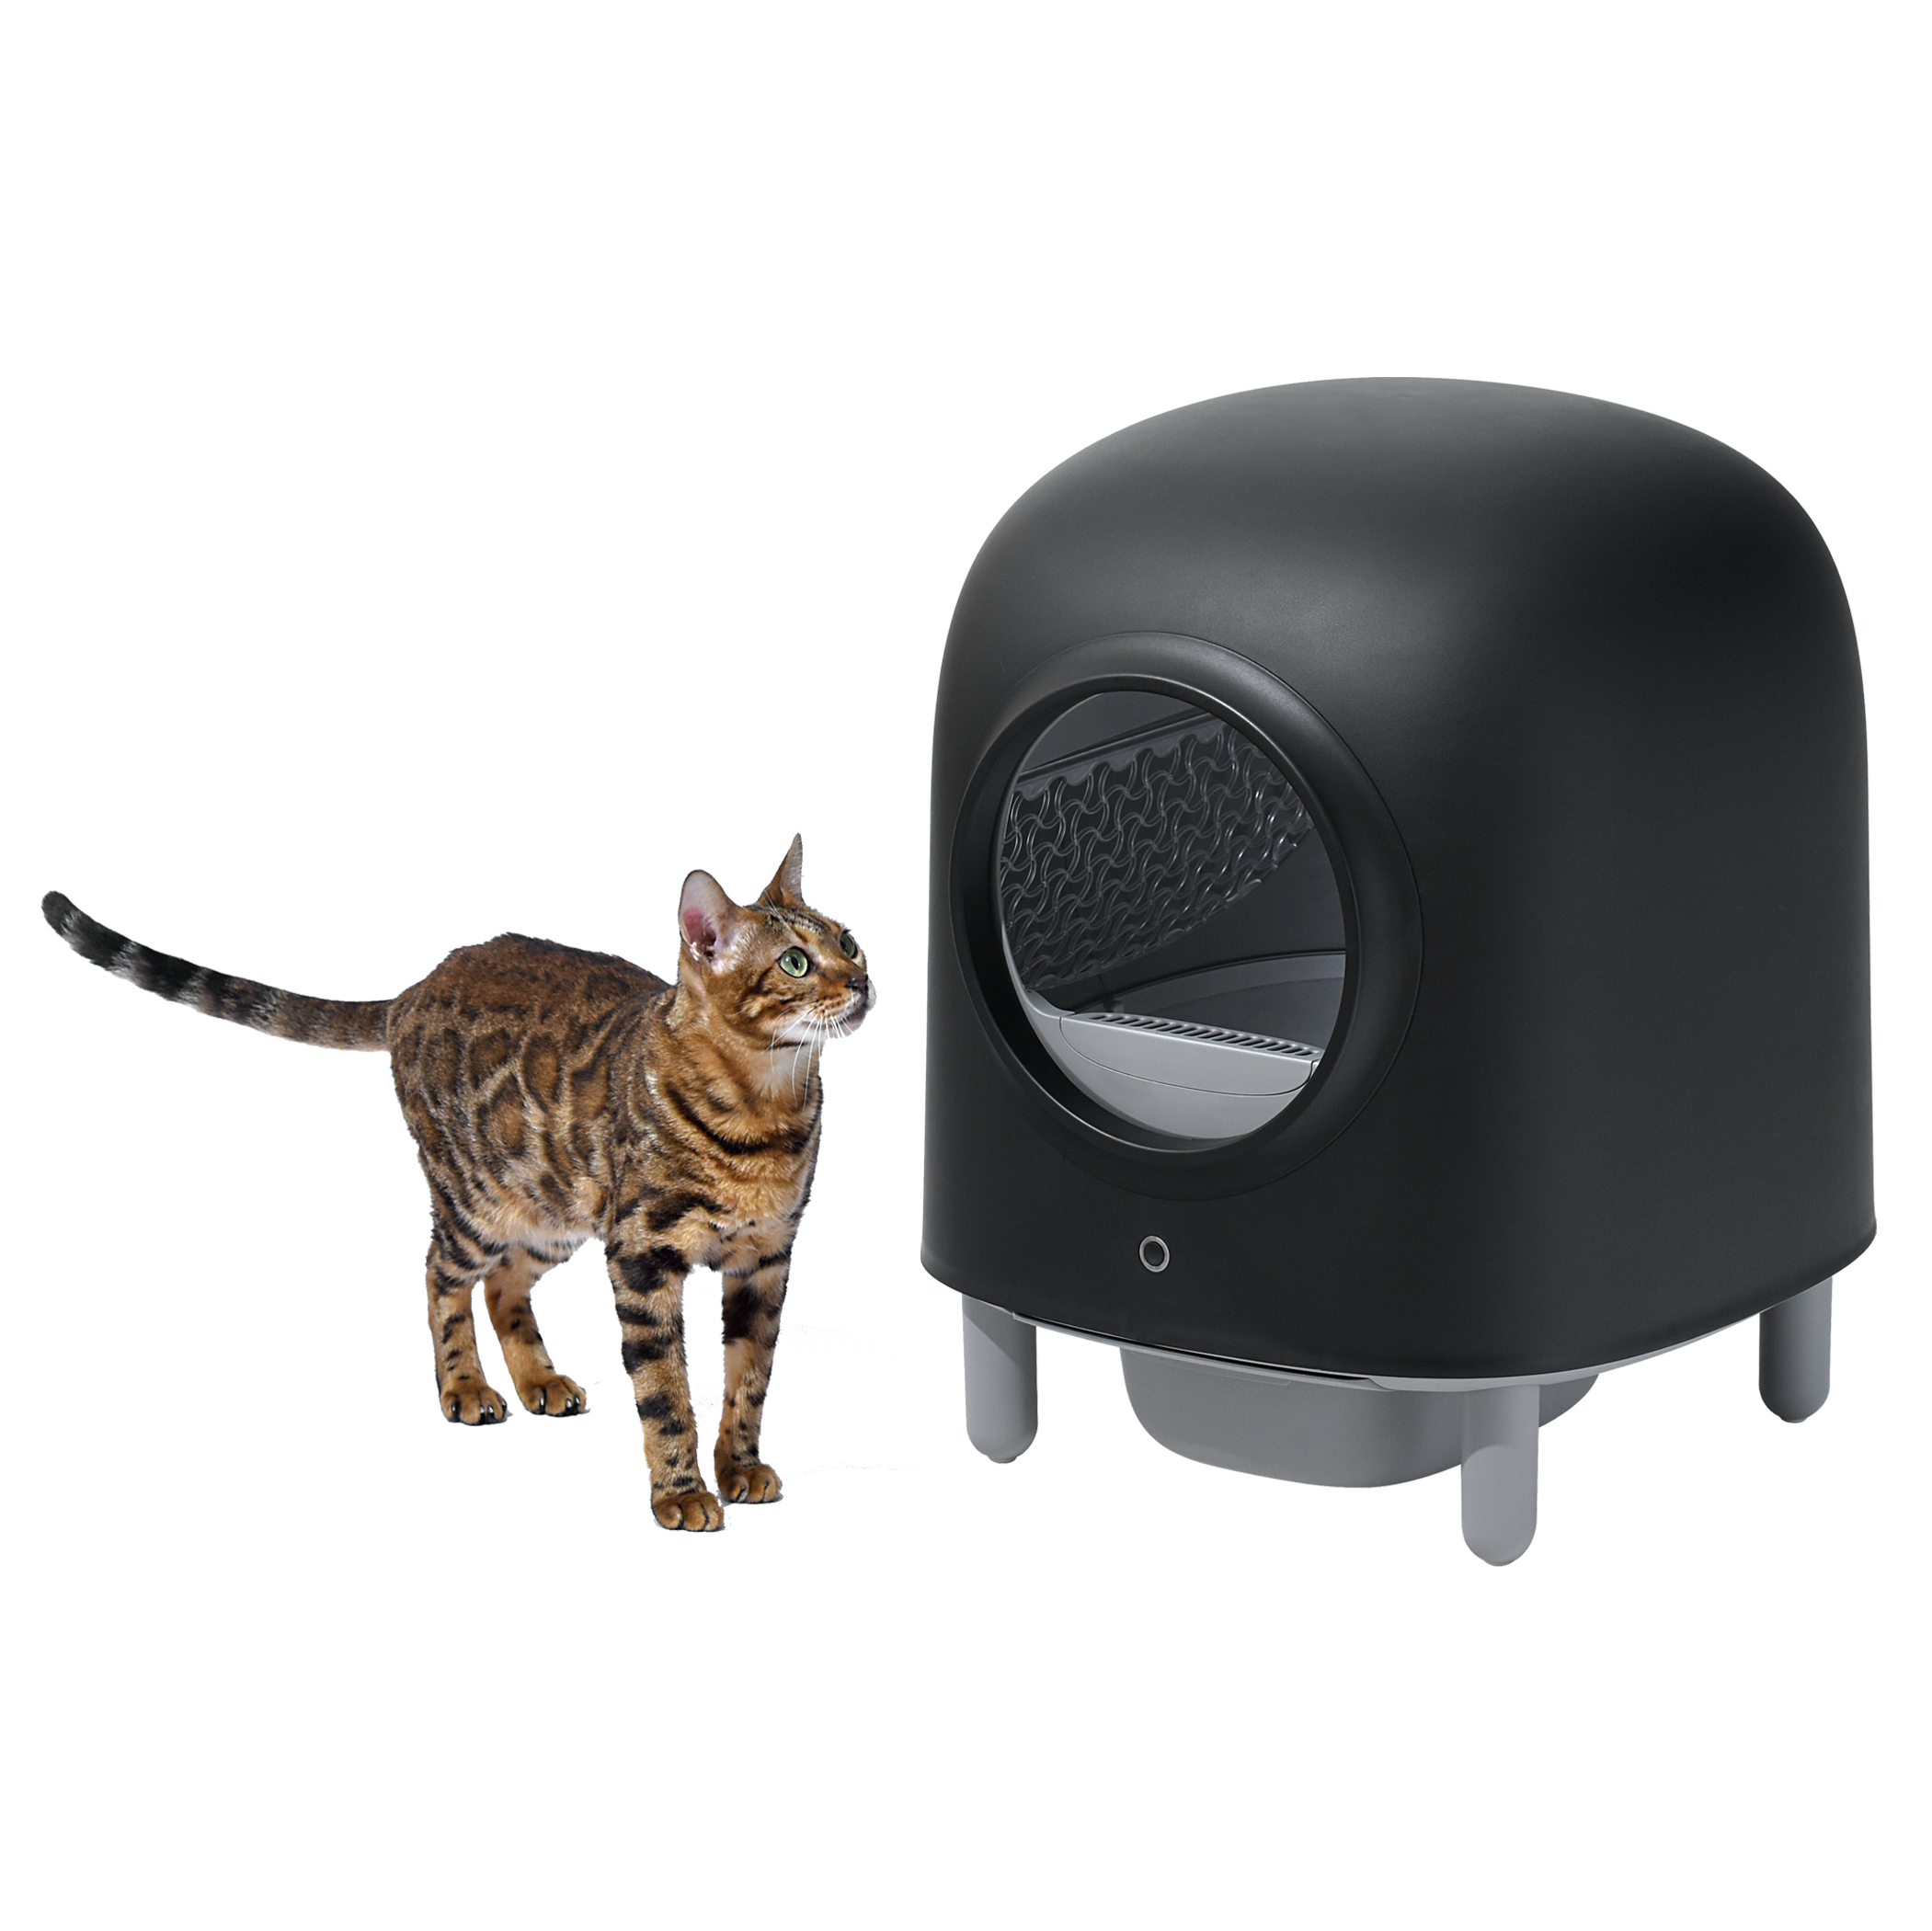 Petree Cube - Self-Cleaning Litter Box - Black Edition